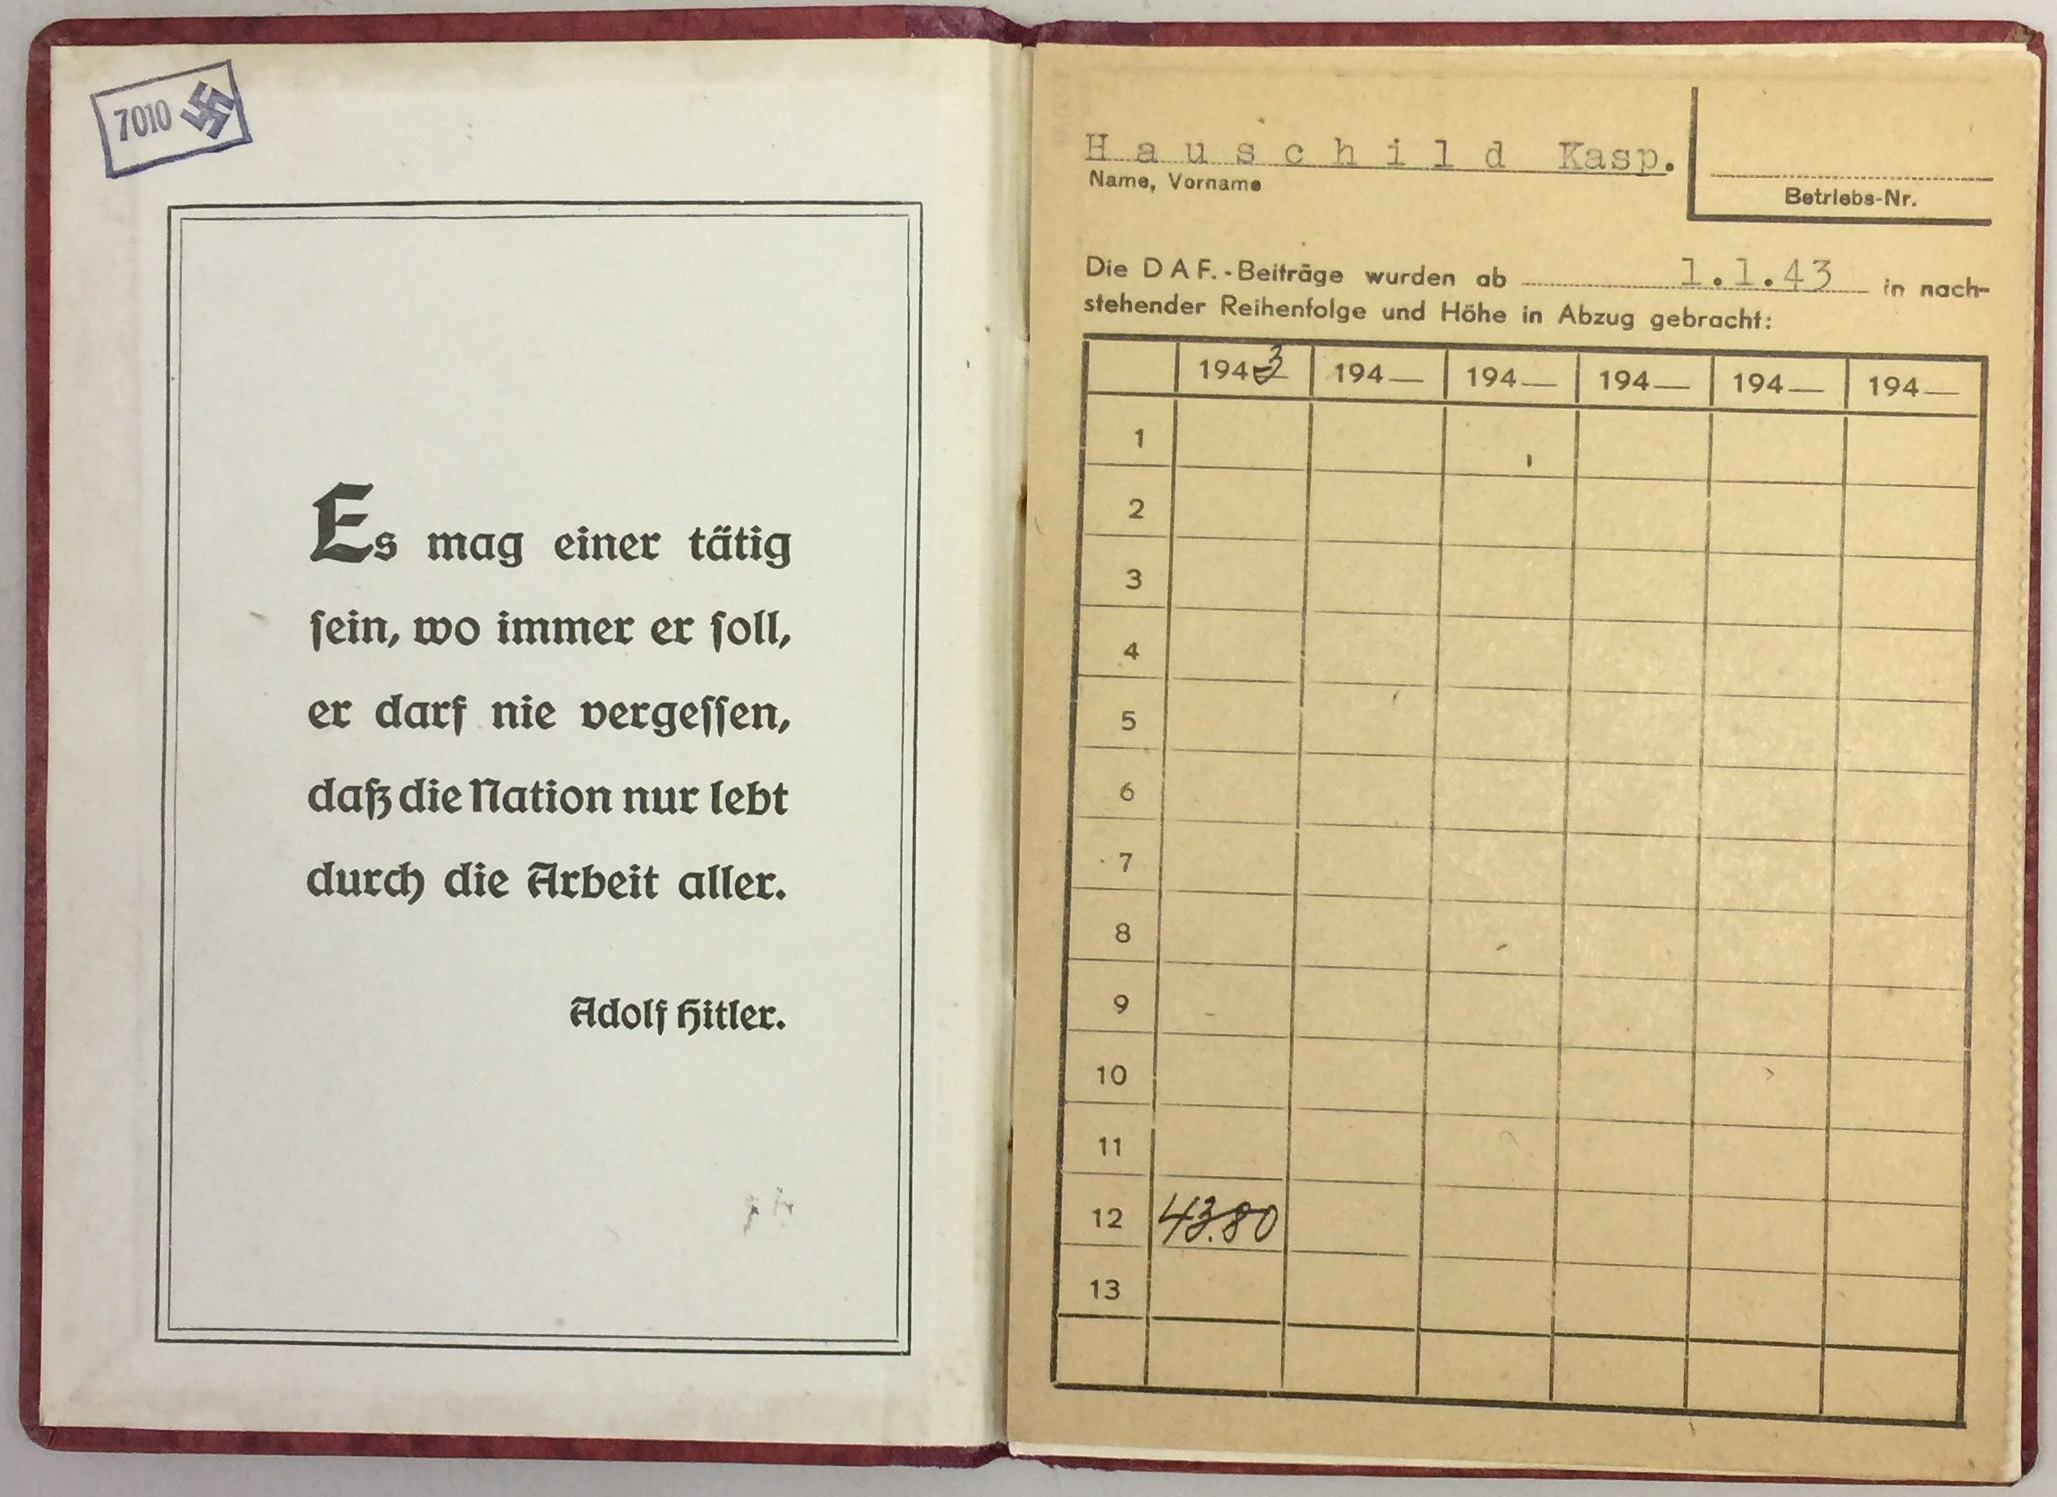 THIRD REICH MEMBERSHIP BOOKS AND DEATH NOTICE. 8 Third Reich "mitgliedsbuchs" dating from 1934-1938. - Image 2 of 4